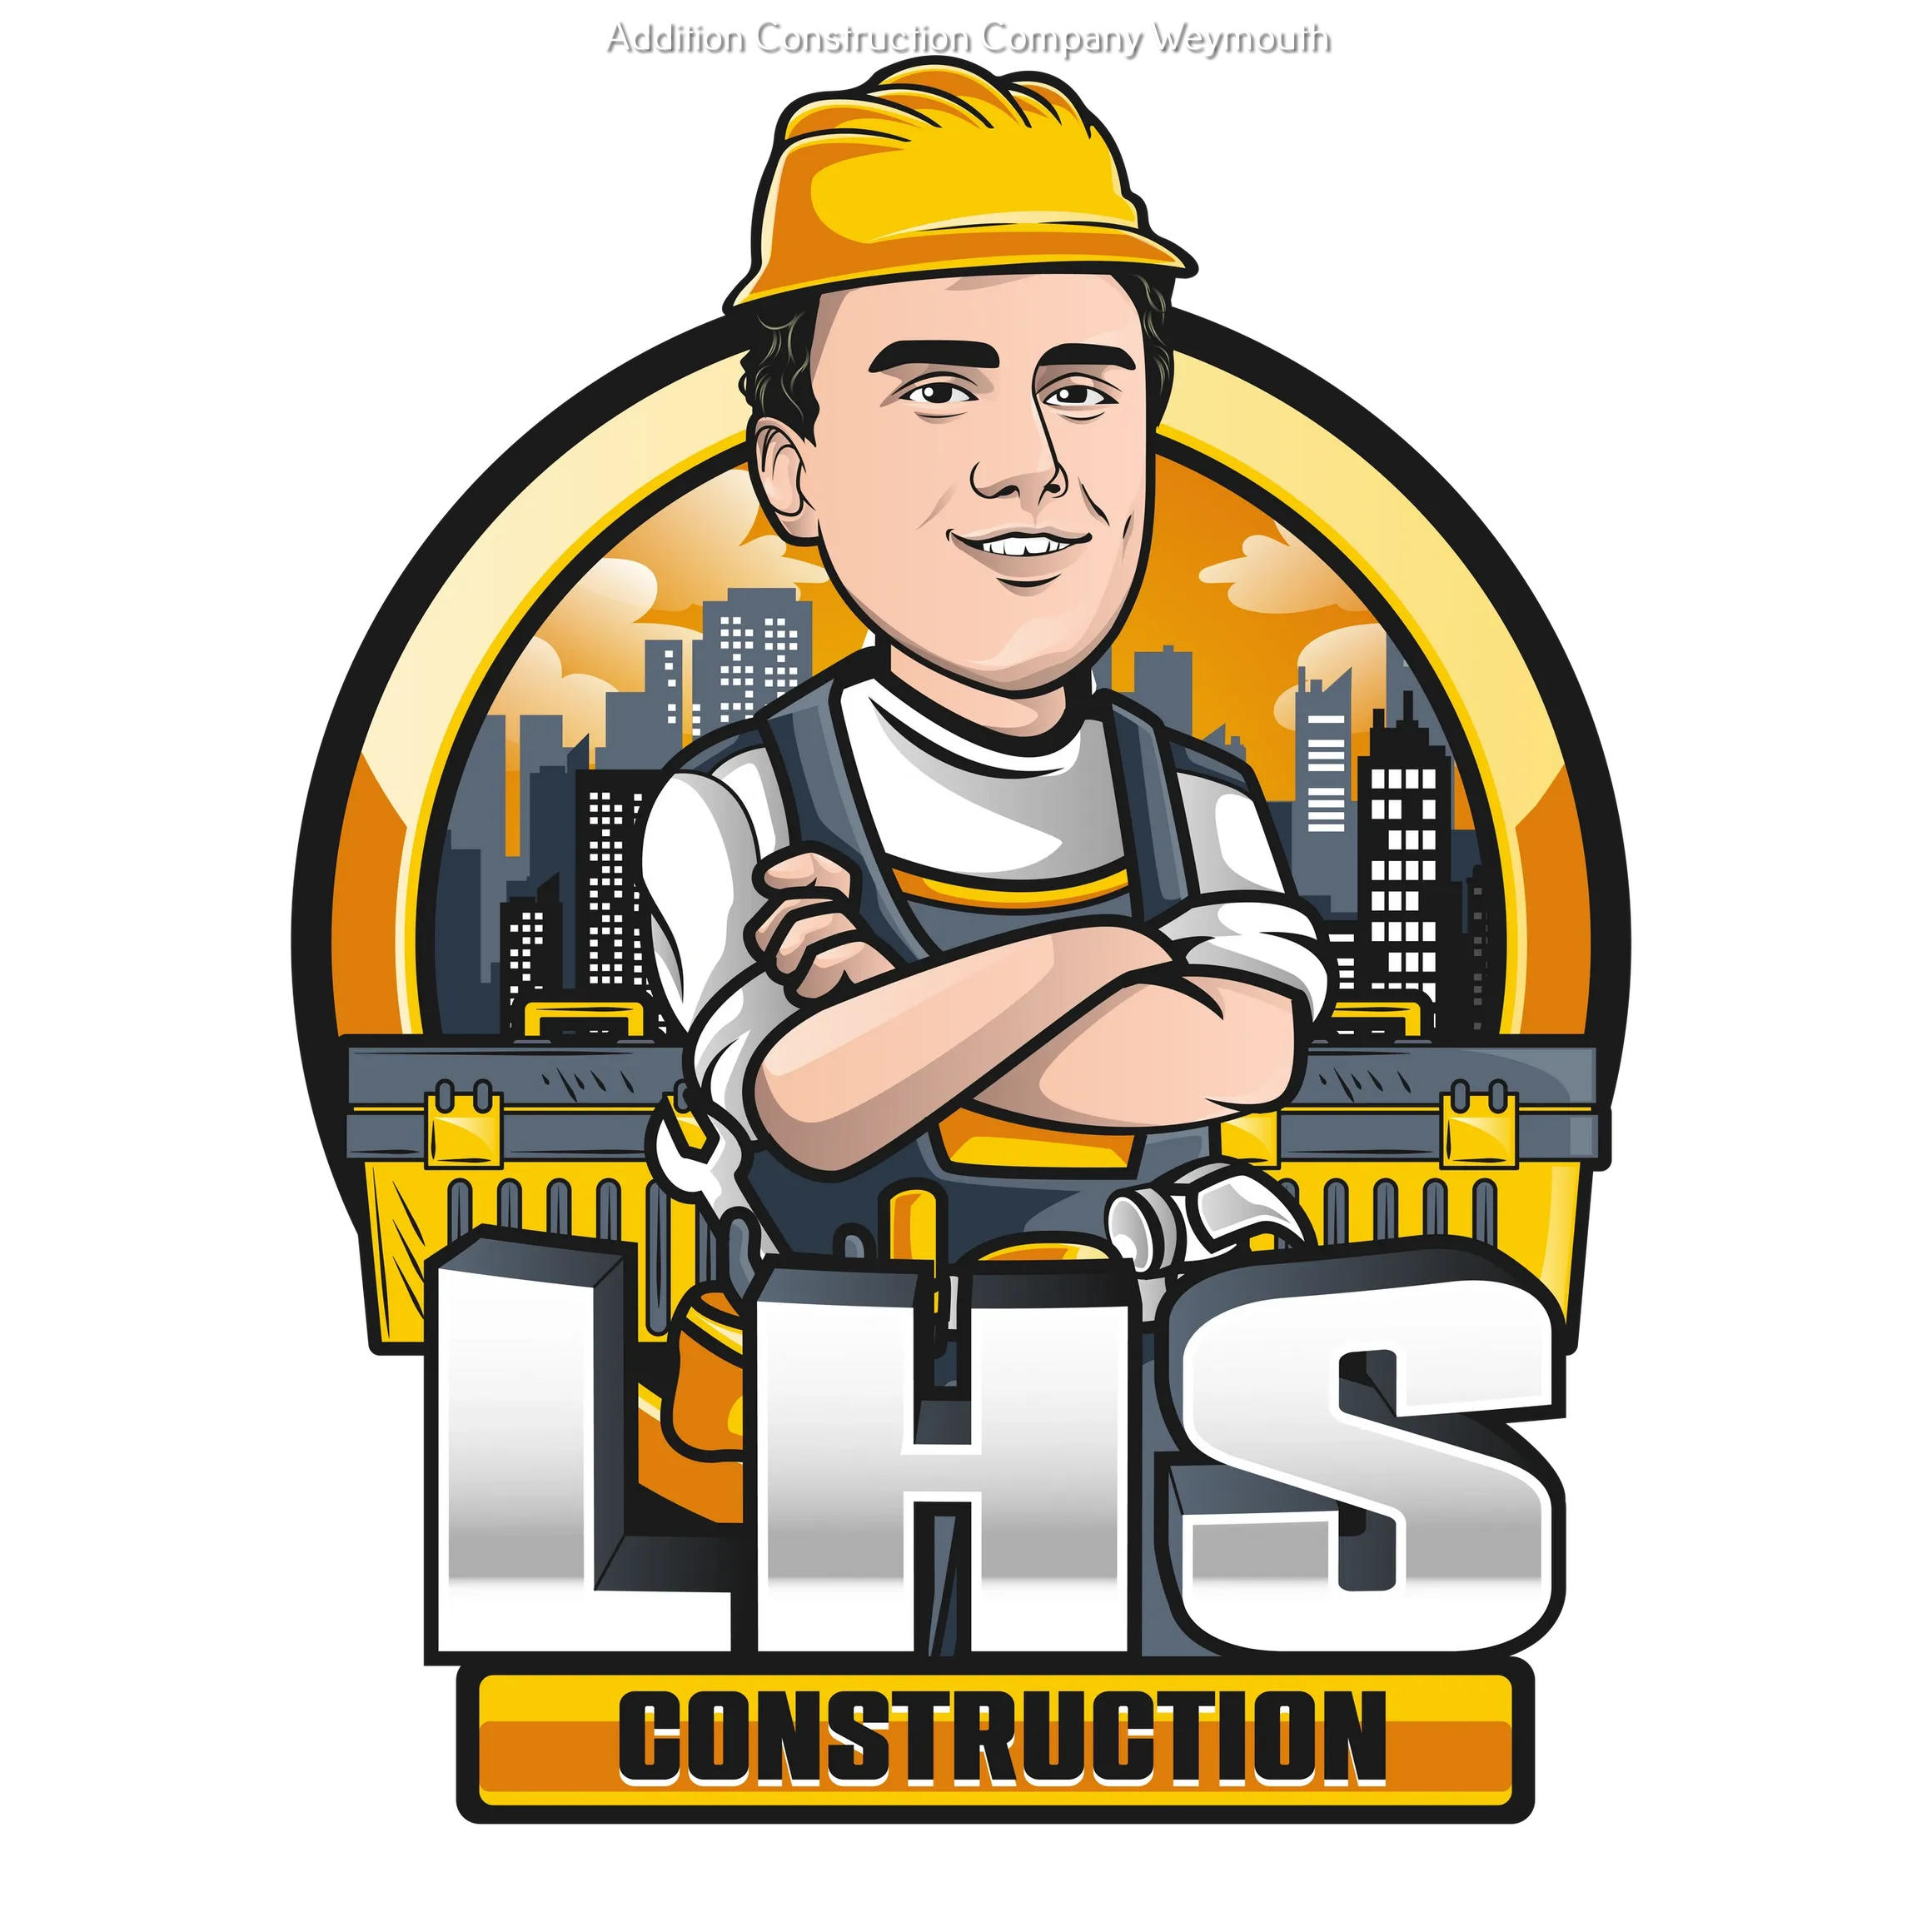 LHS Construction Explains the Services It offers In Weymouth